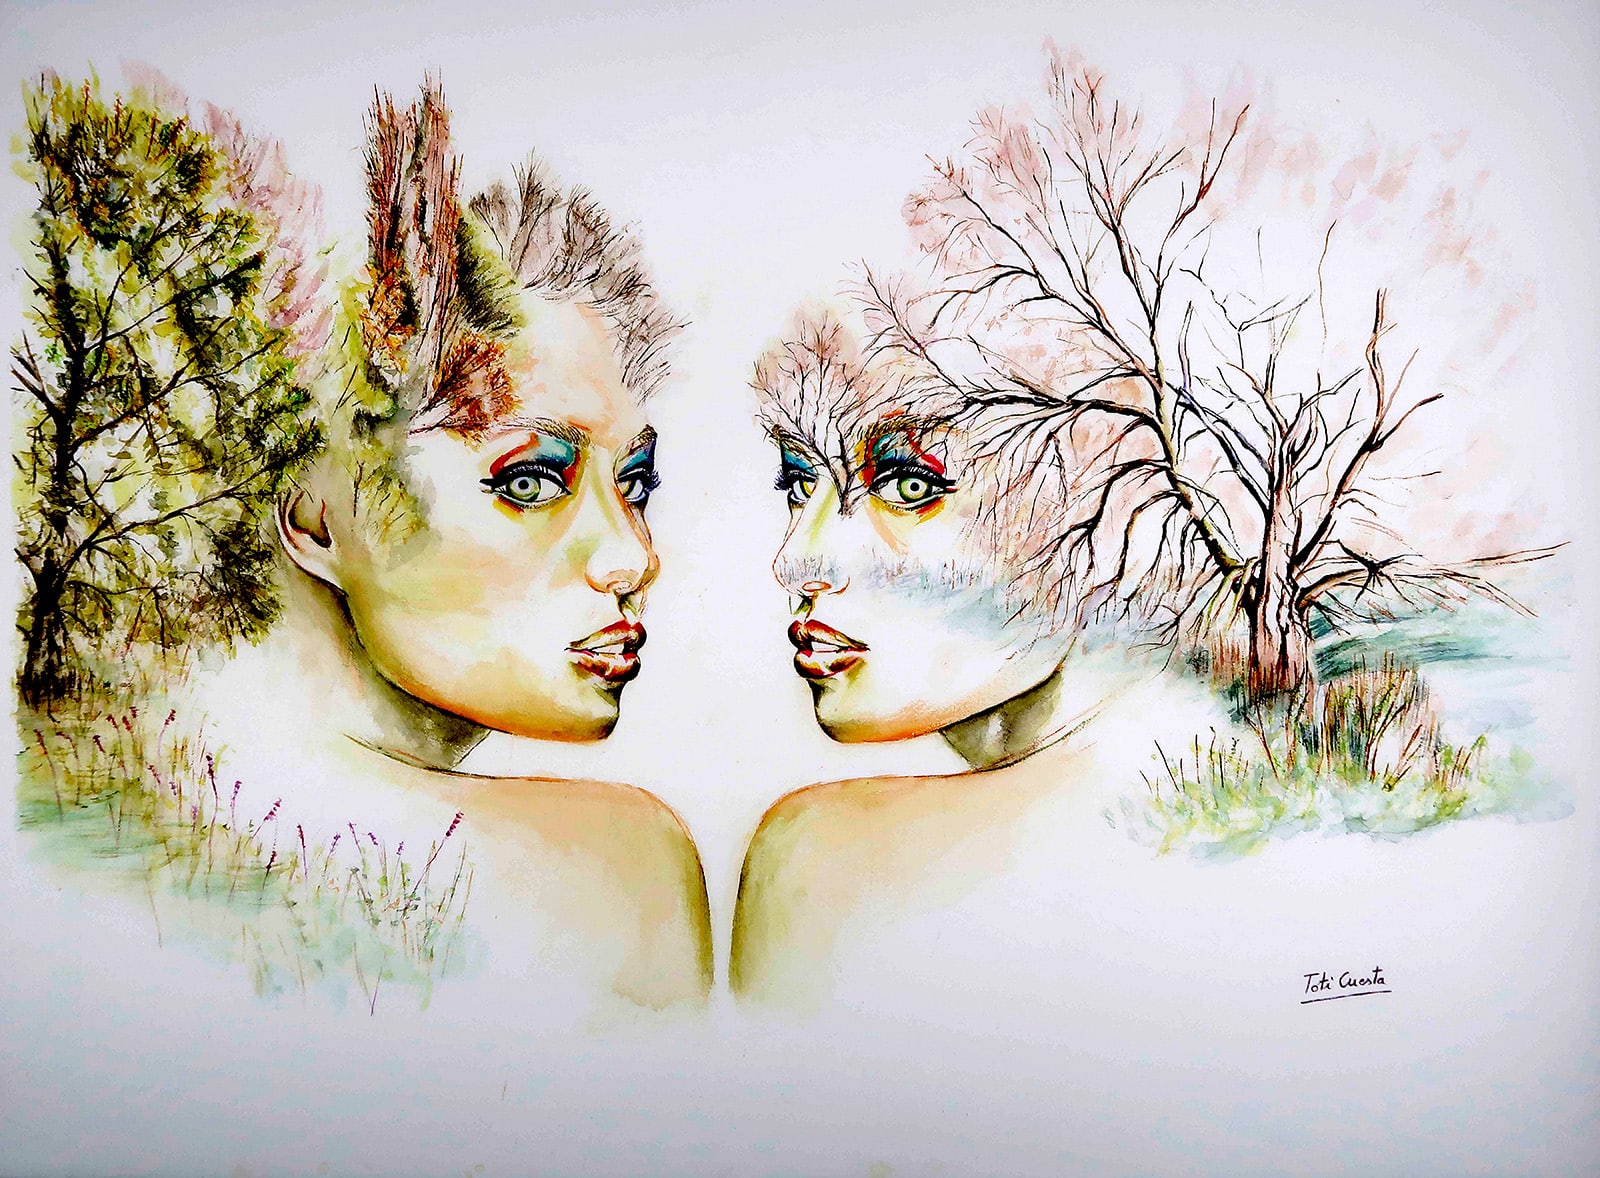 "I Am Nature" Watercolor On 640 gr Paper, 76 x 56 cm by Toti Cuesta